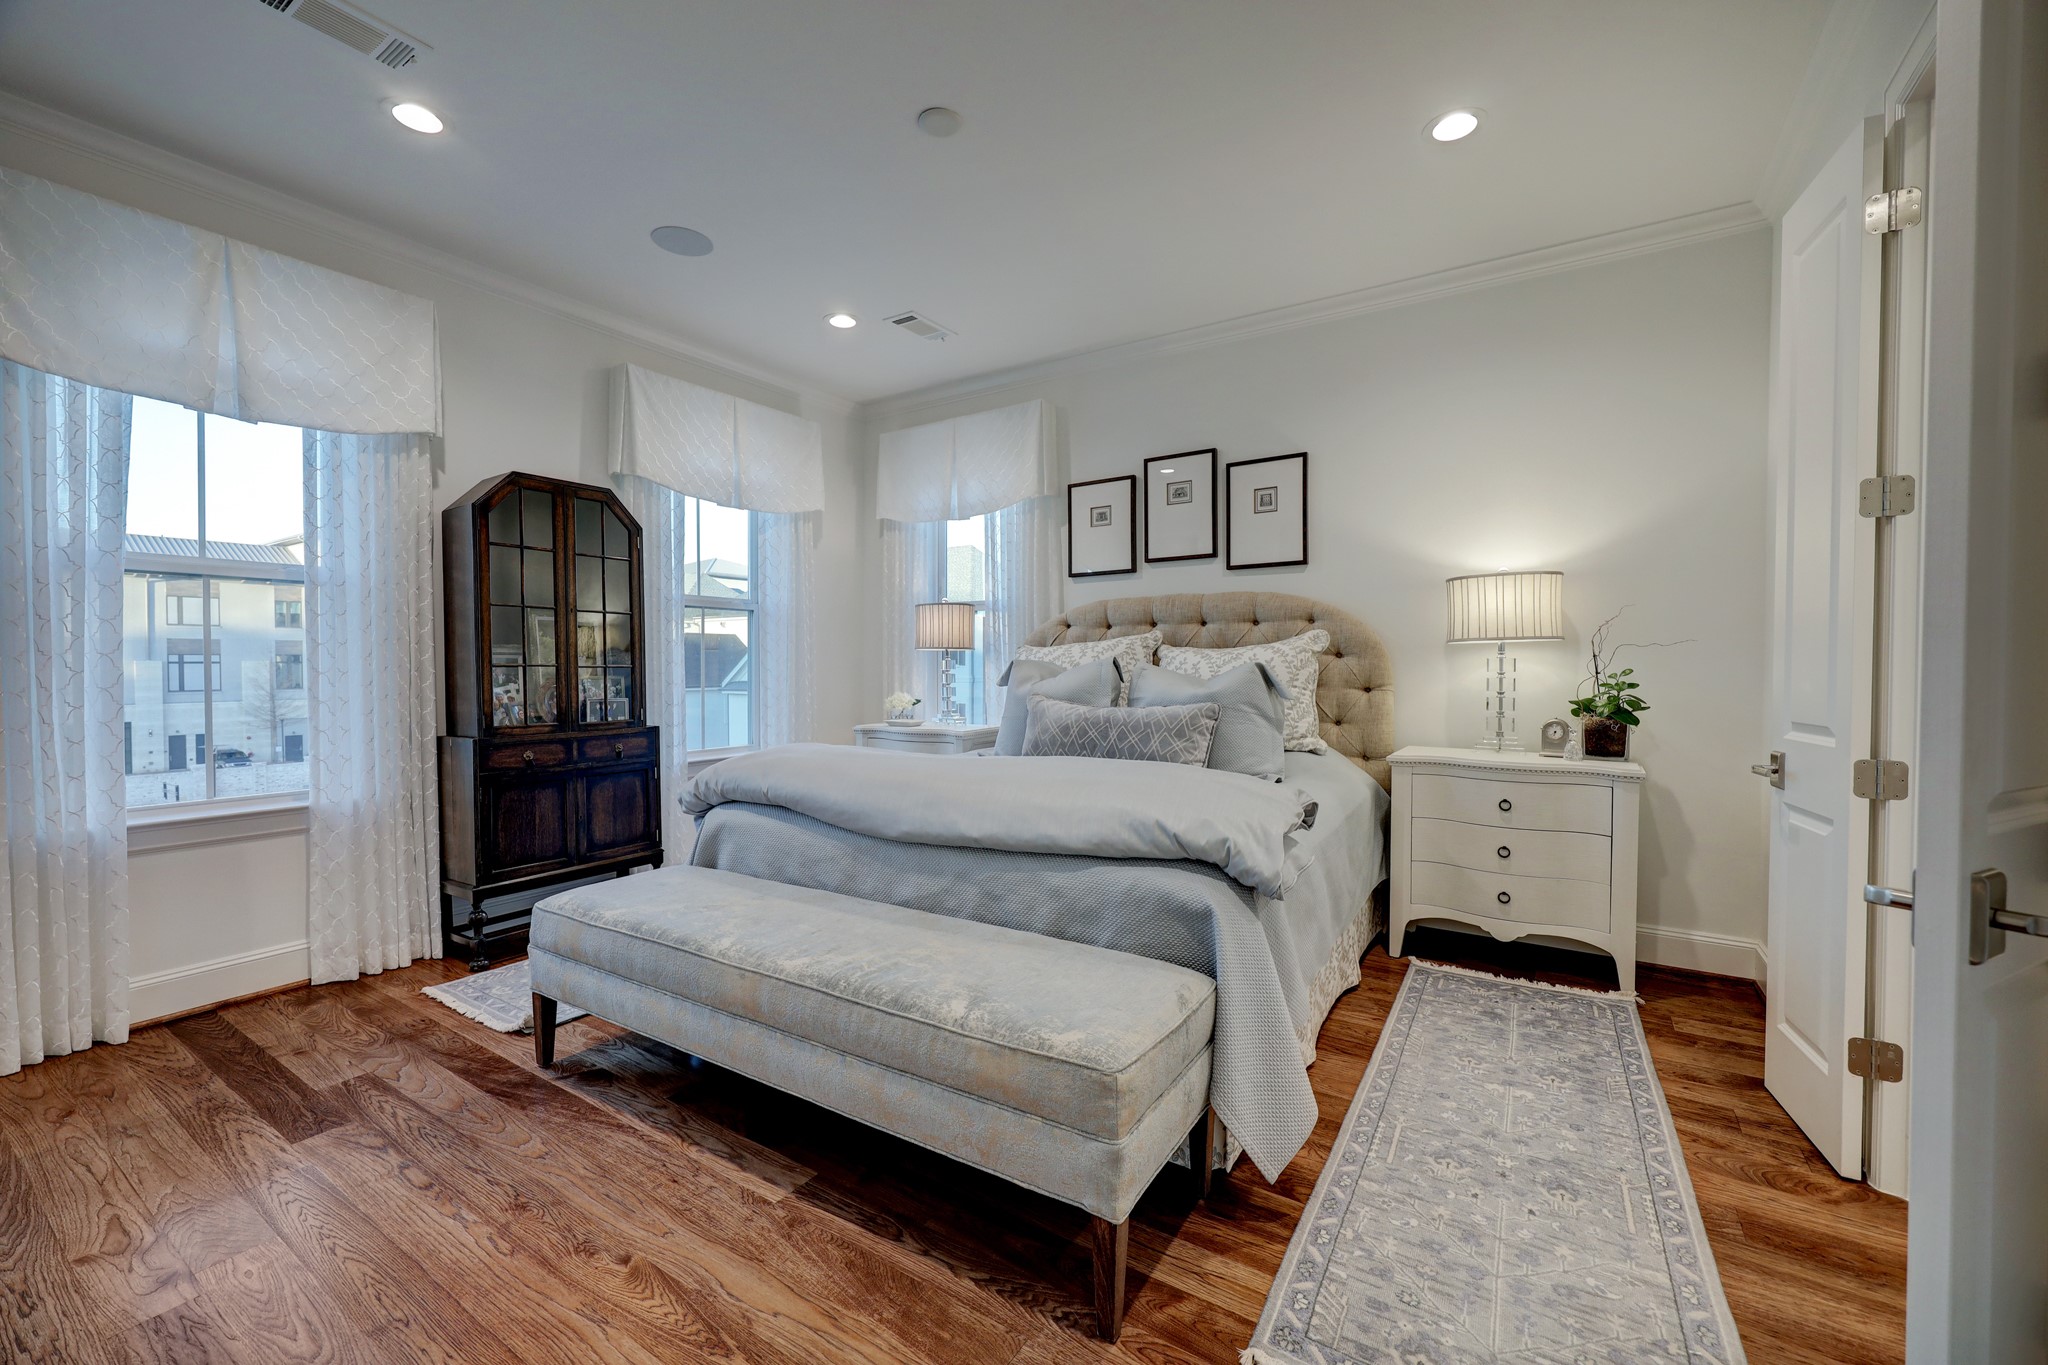 Restore and relax in your primary retreat featuring abundant natural light, hickory wood flooring, recessed lighting, and two expansive walk-in closets with custom built-in drawers and shelving.